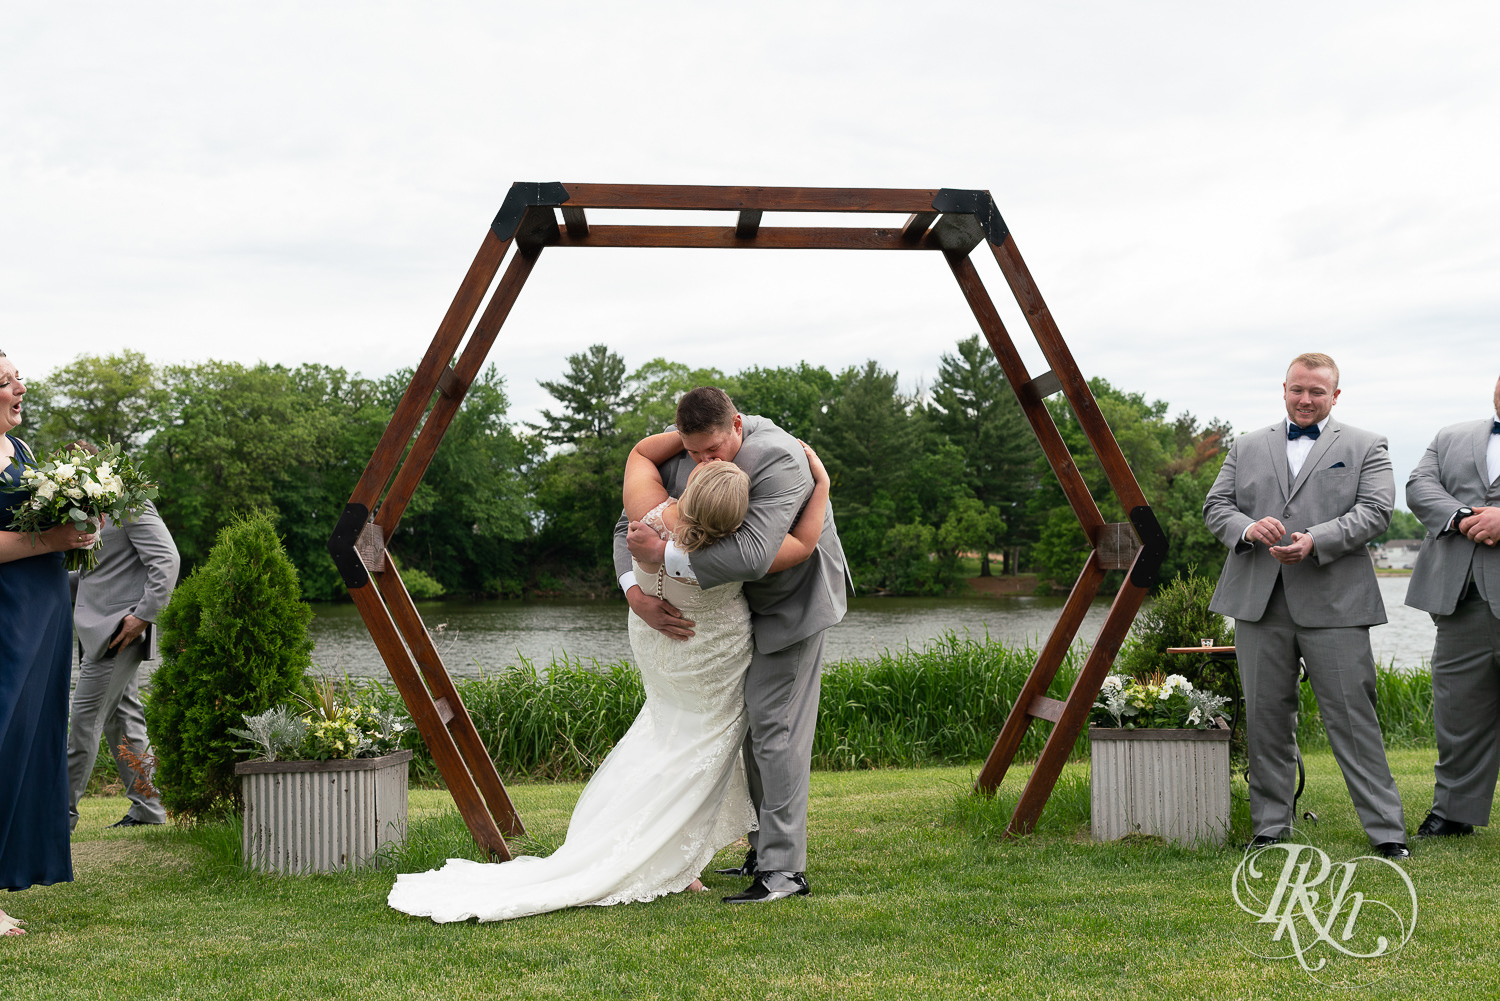 Bride and groom at lakefront wedding ceremony at Barn at Mirror Lake in Mondovi, Wisconsin.